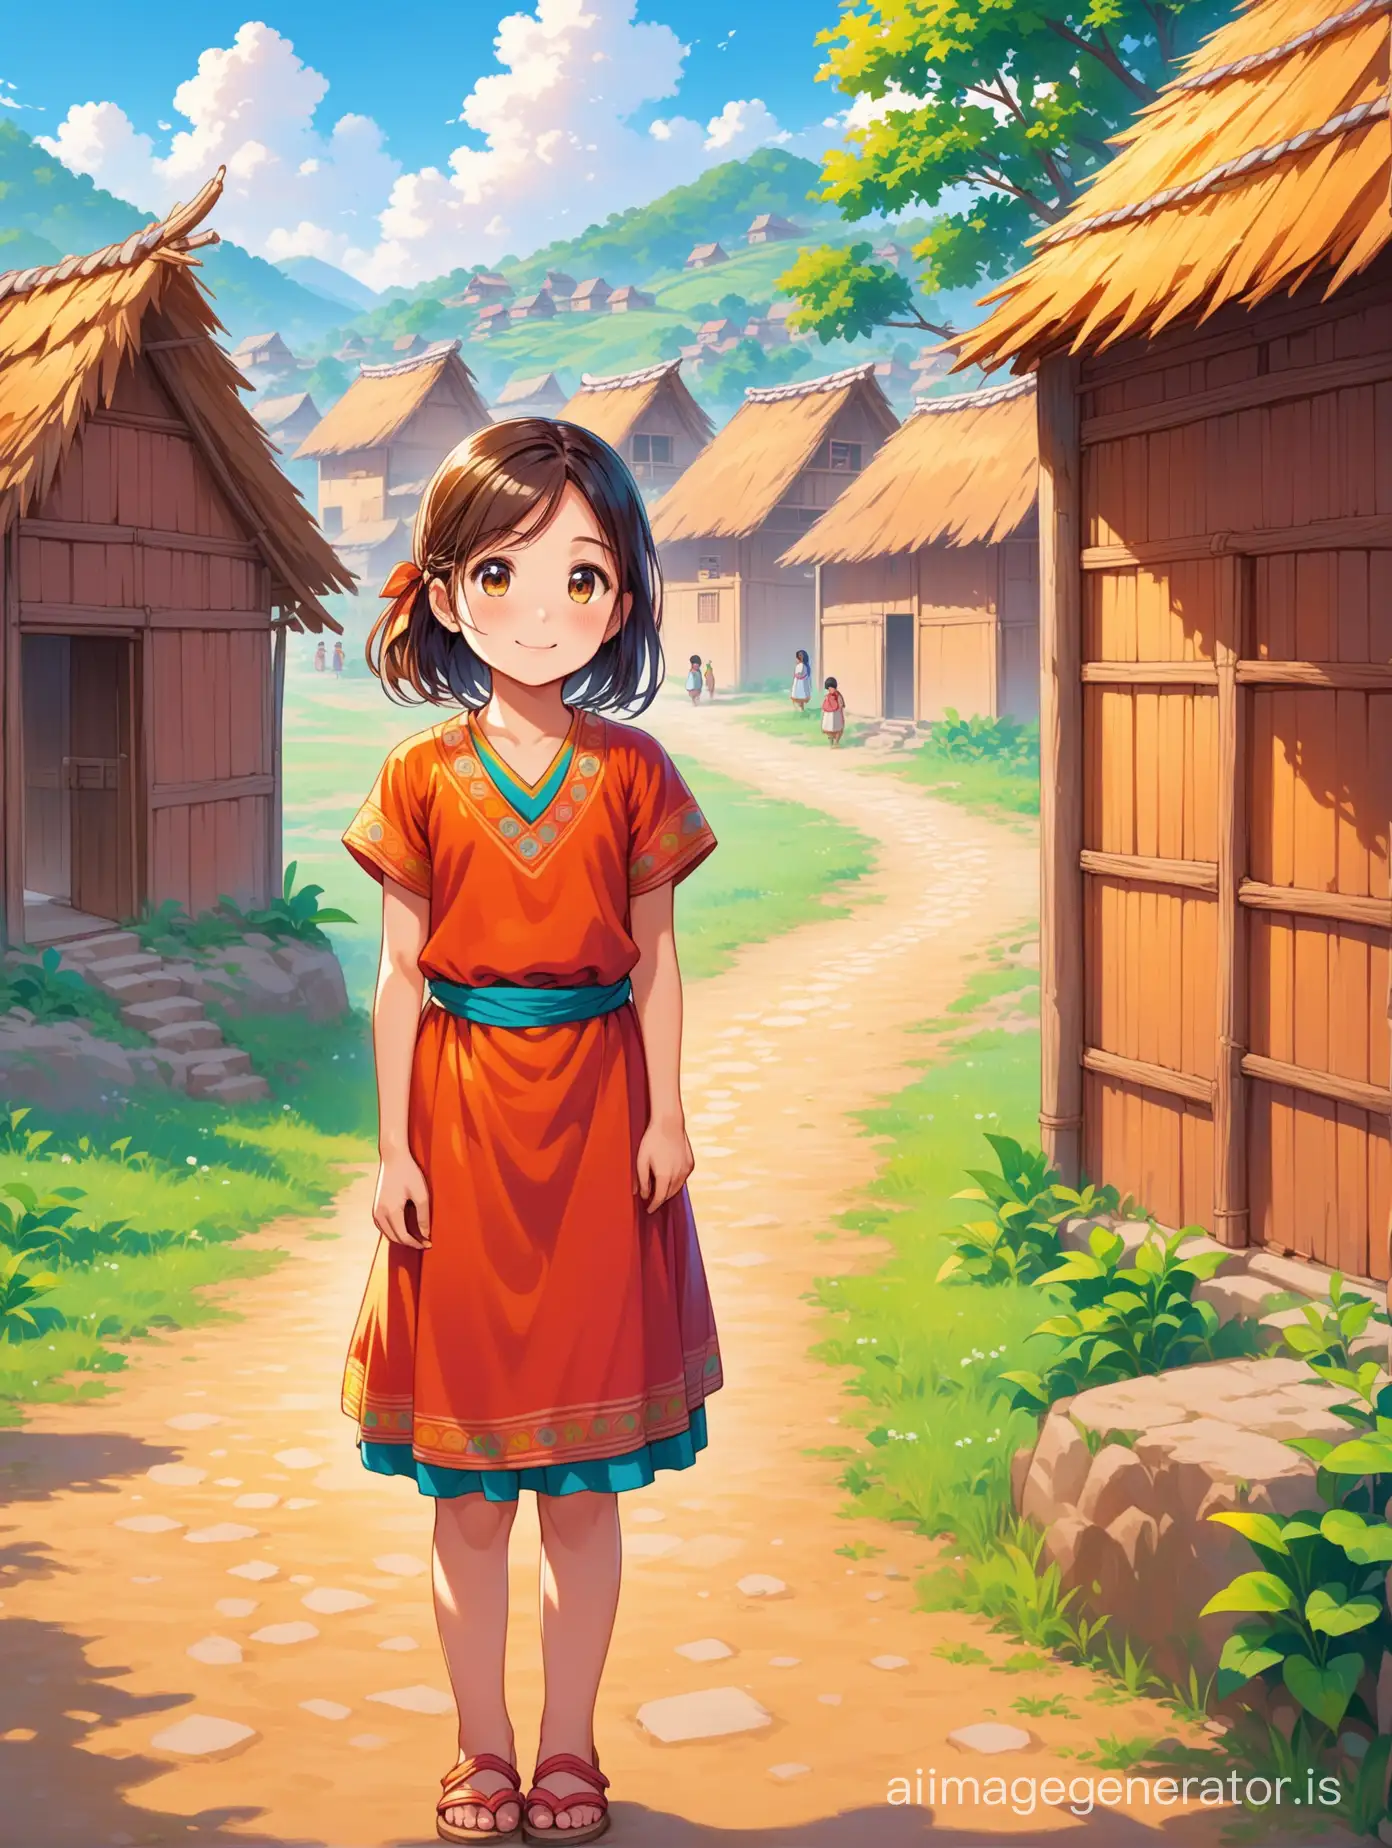 Curious-Young-Girl-Exploring-Colorful-Village-Life